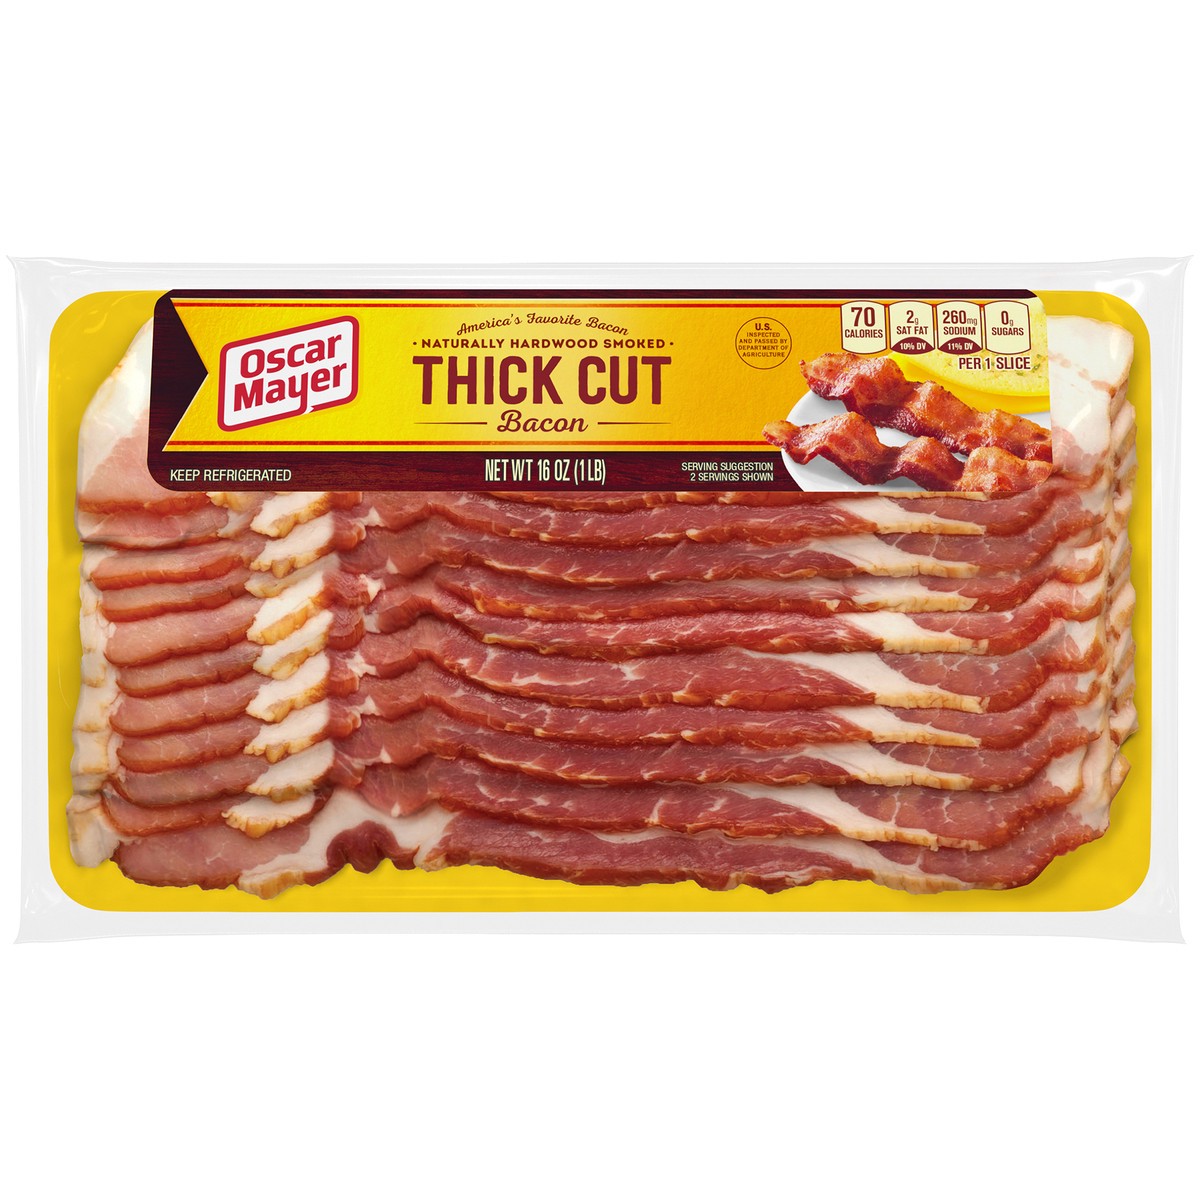 slide 14 of 15, Oscar Mayer Naturally Hardwood Smoked Thick Cut Bacon, 16 oz Pack, 11-13 slices, 16 oz